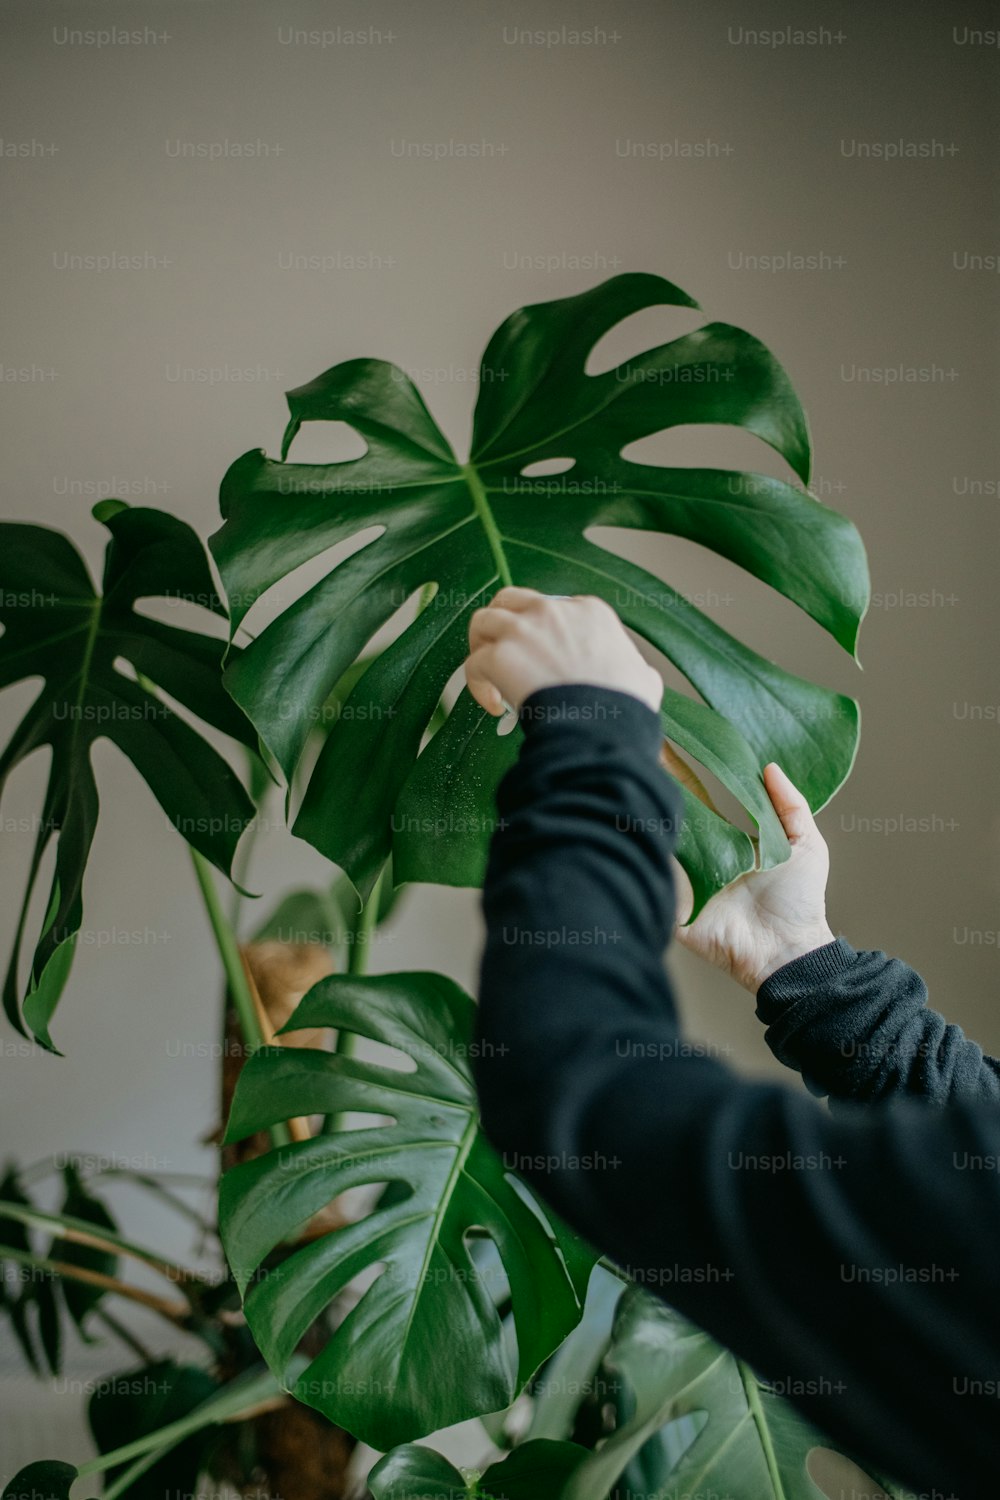 a person reaching up to a large green plant